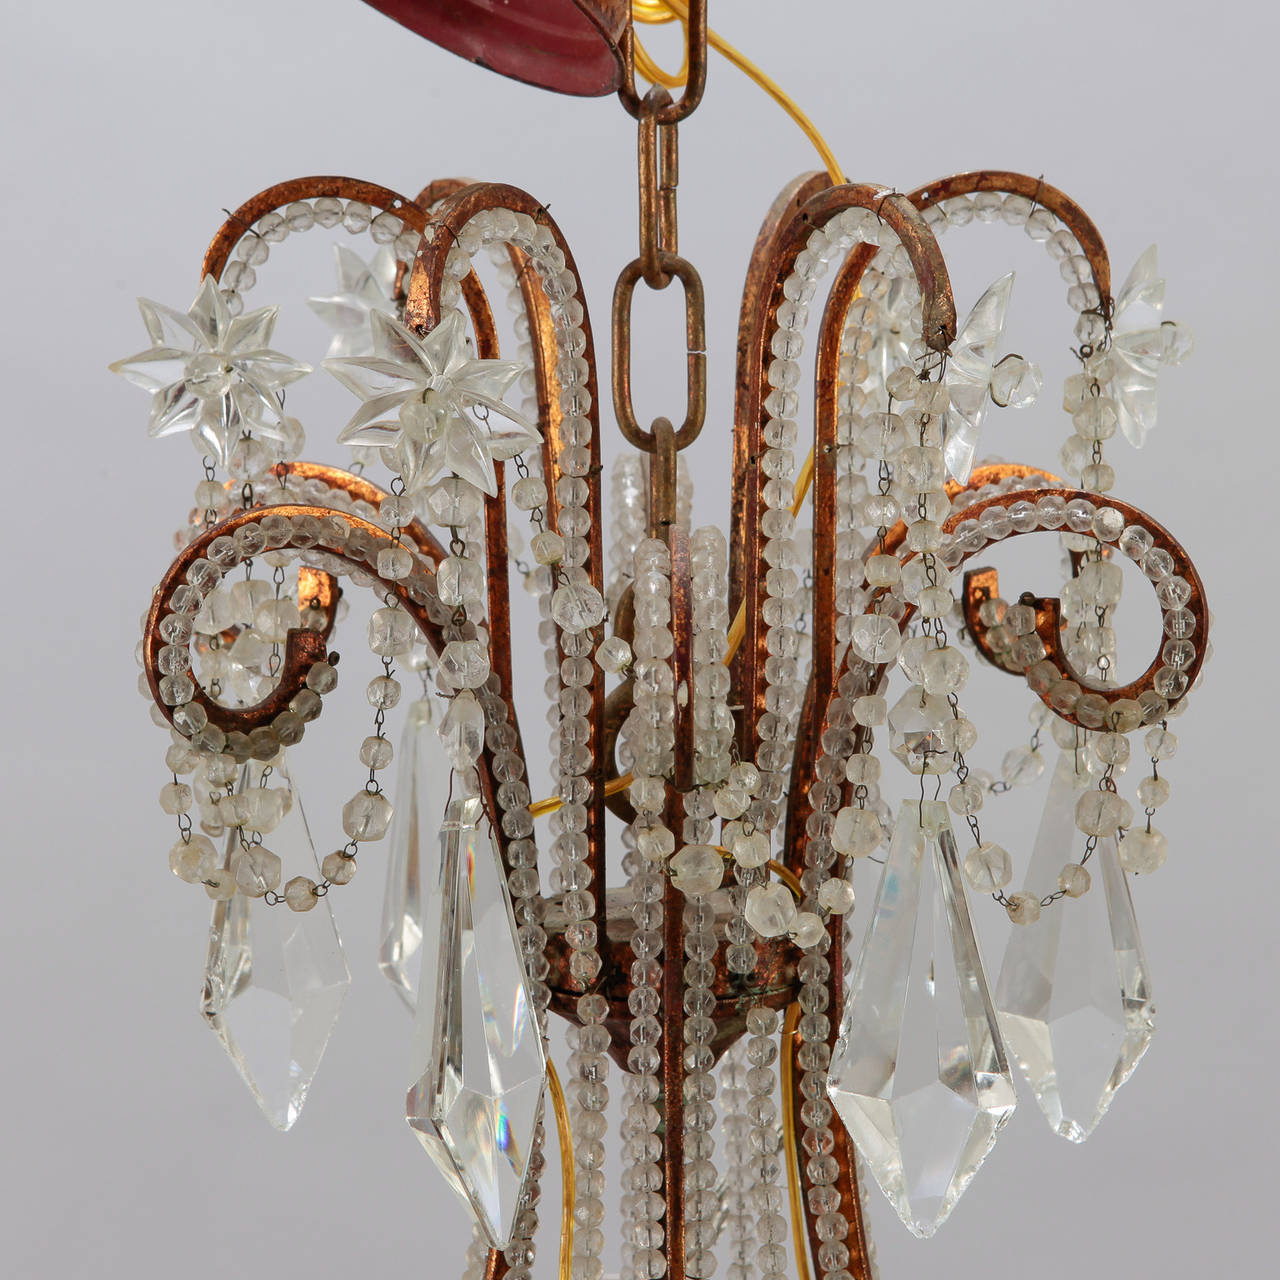 Italian chandelier with gilt metal frame, twelve candle style lights, embellished with large faceted drops and a lot of crystal beading, circa 1900. New electrical wiring for US standards.
# of sockets: 12
Socket type: Candelabra.